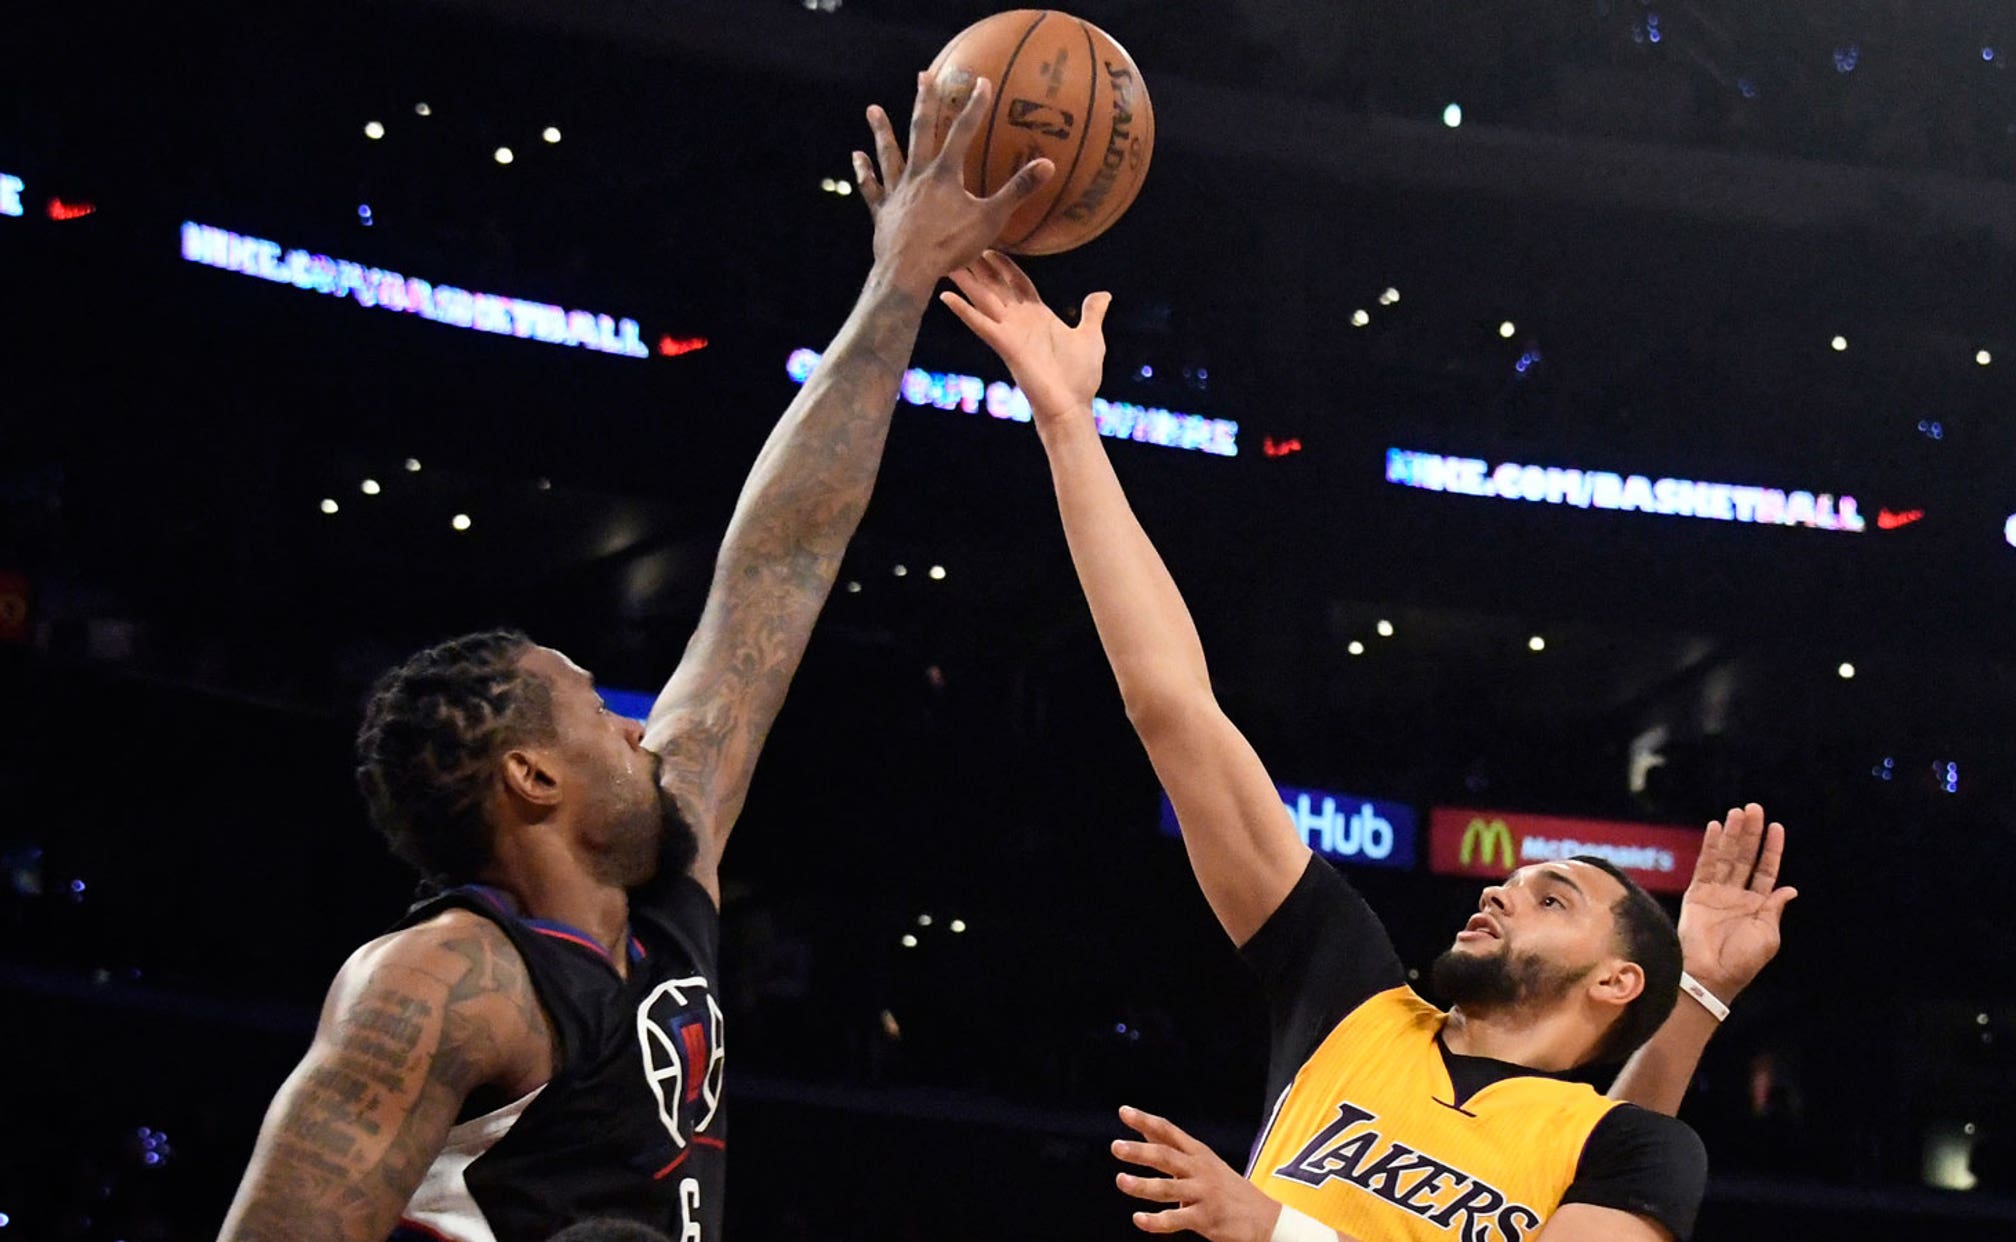 Clippers blowout Lakers 133-109 | FOX 